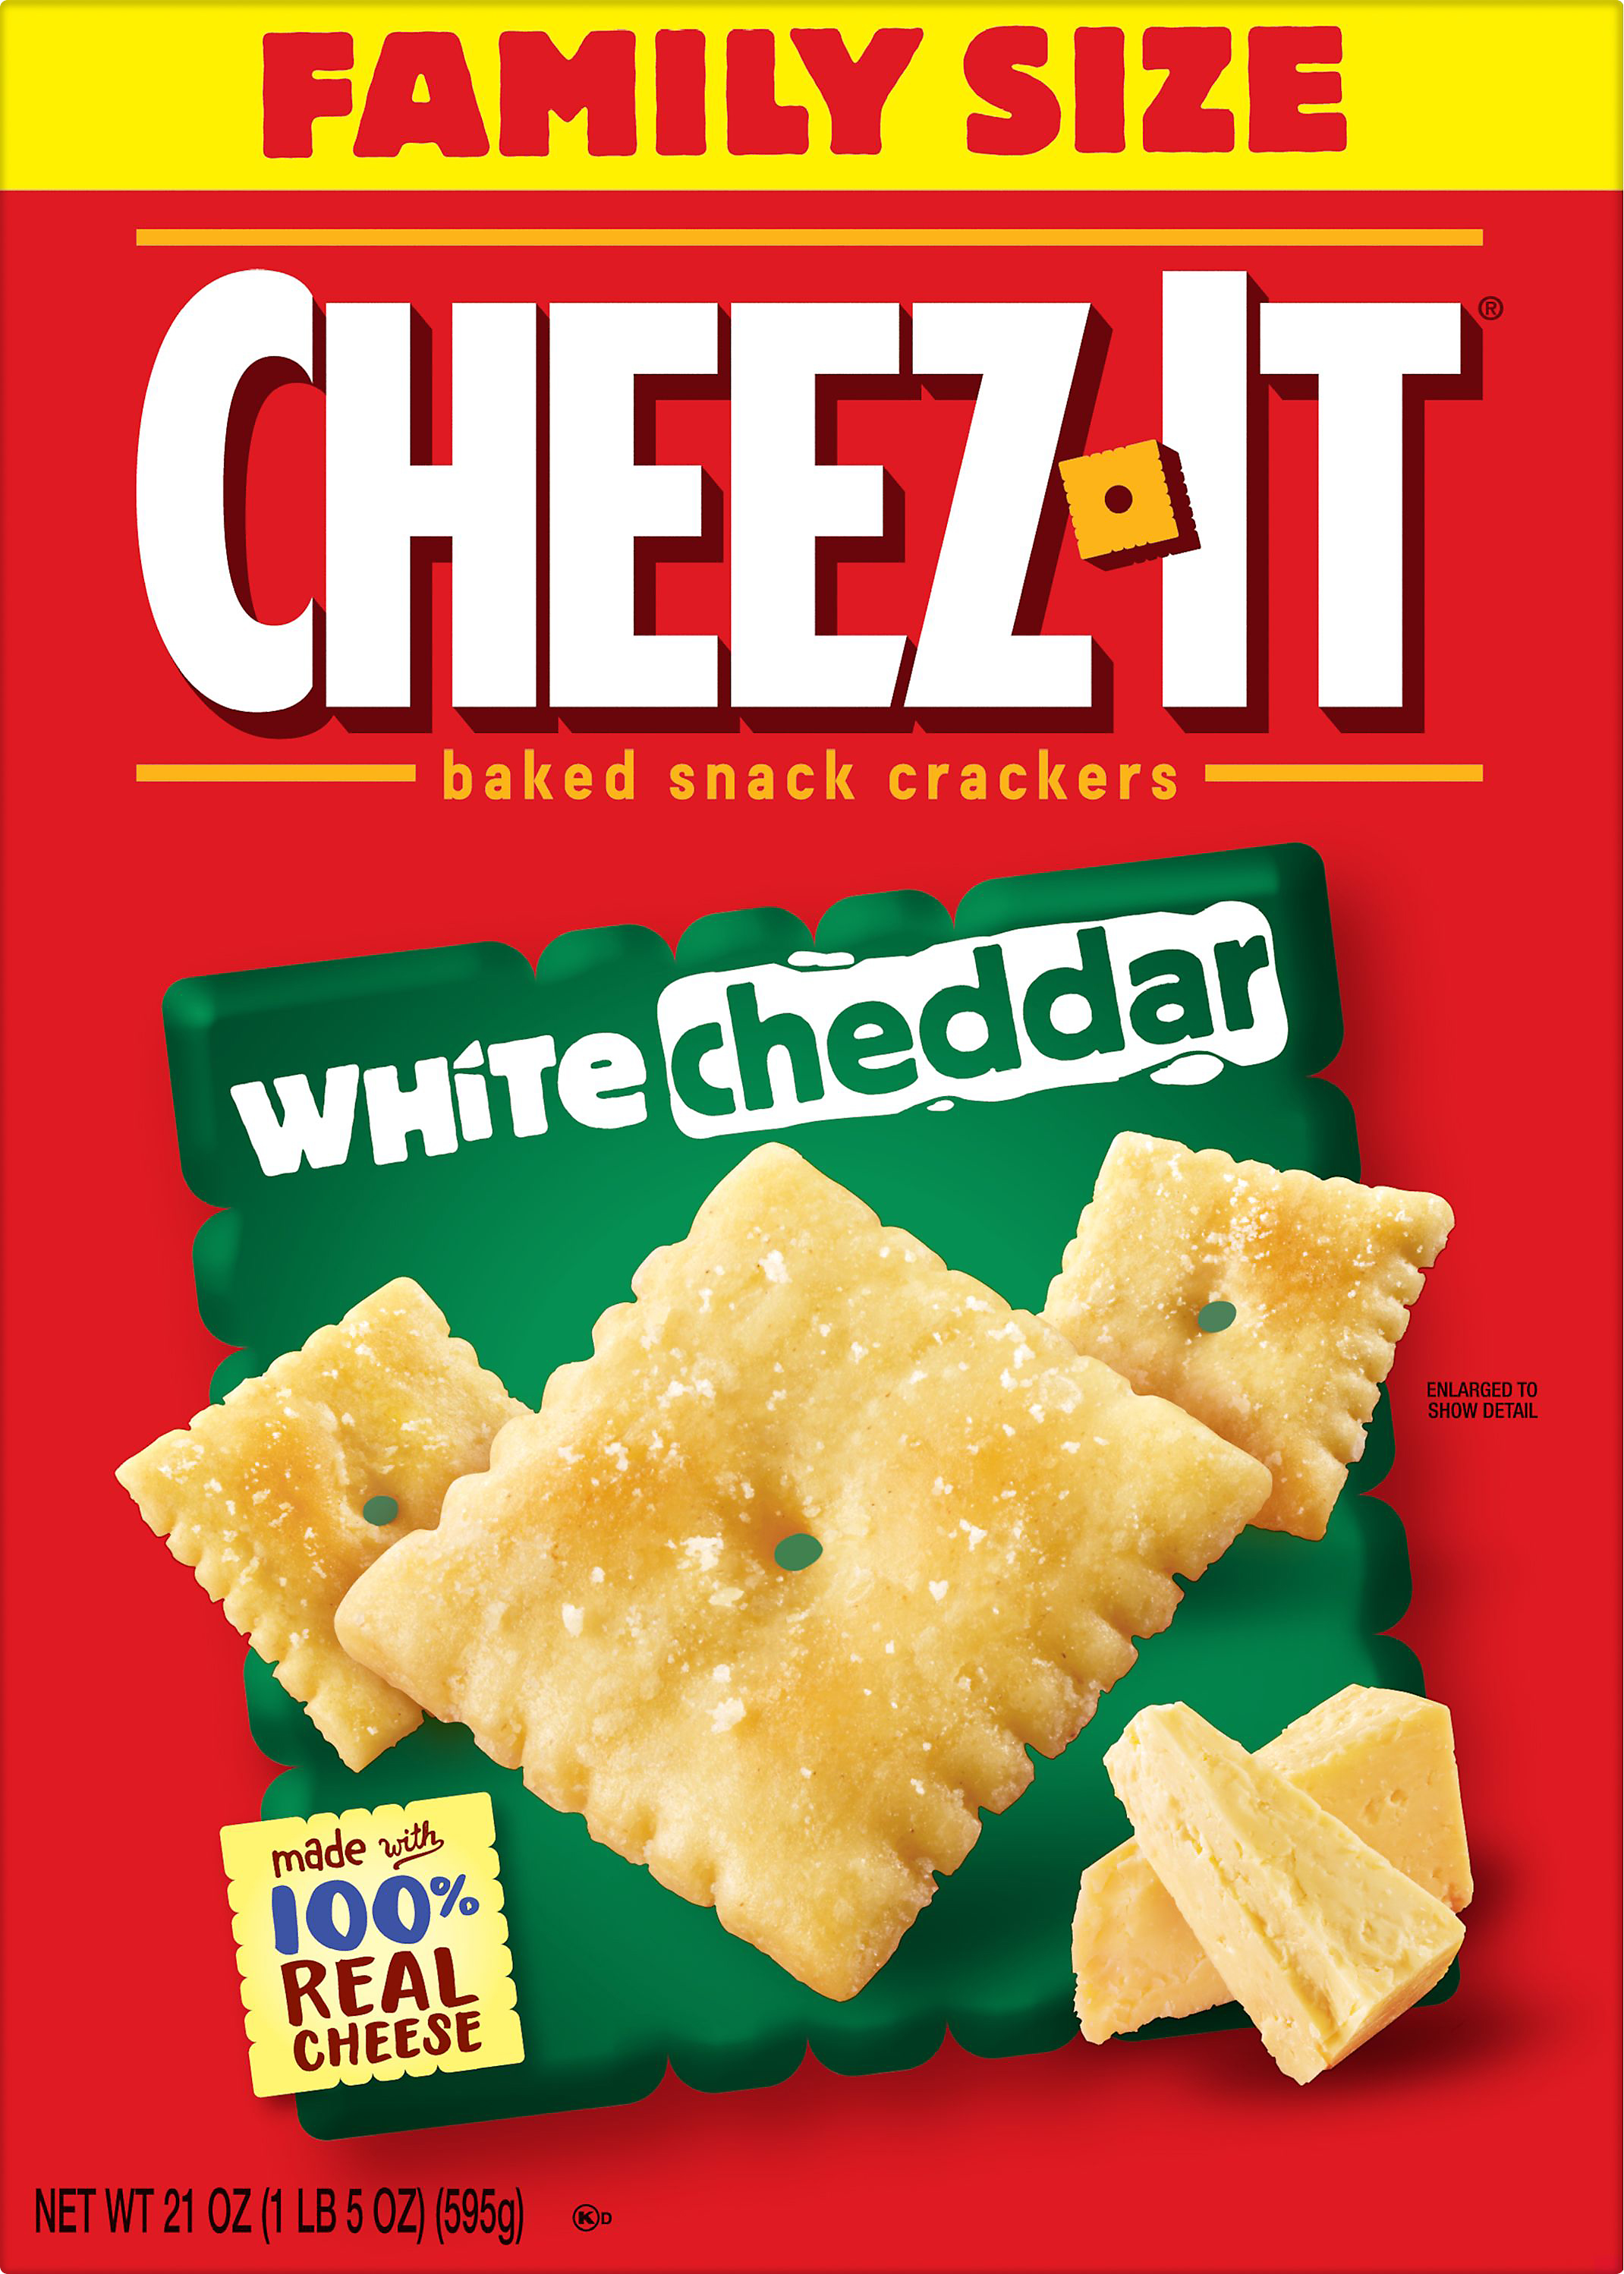 Cheez-It Family Size White Cheddar Baked Snack Crackers 21 oz